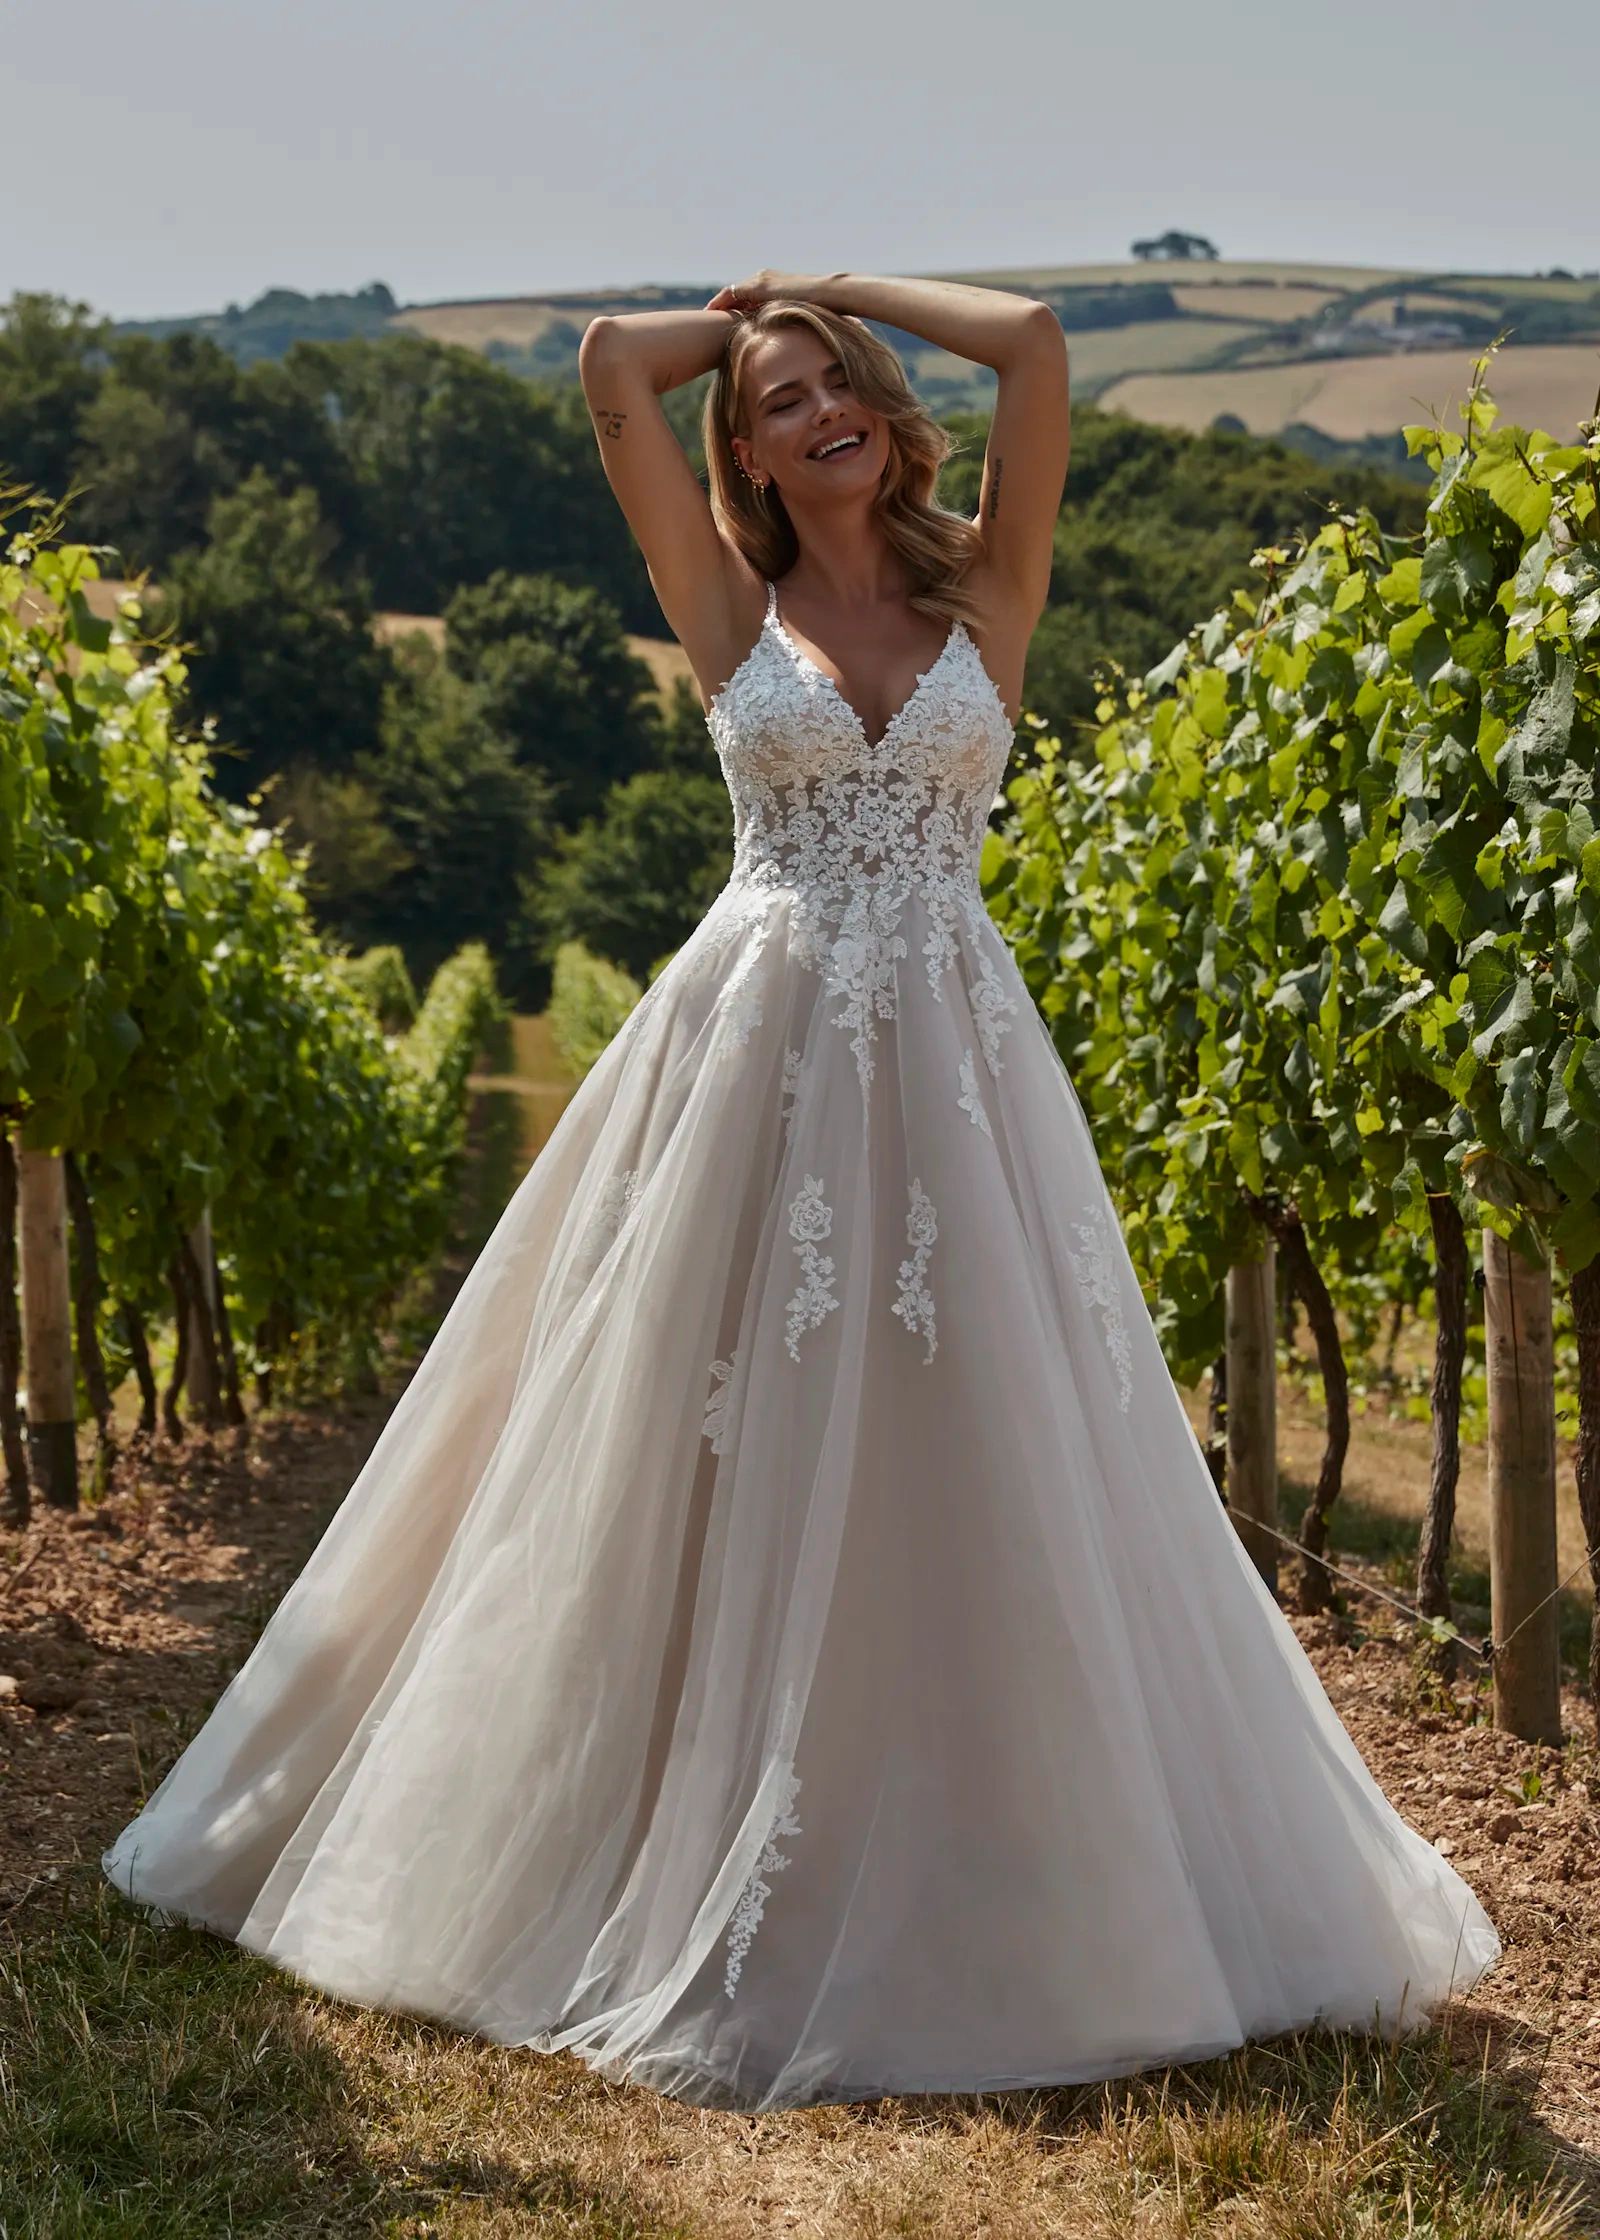 JW220925
Wonderful lace covered A-line dress with a V-neckline and beaded spagetti straps. Shown in 